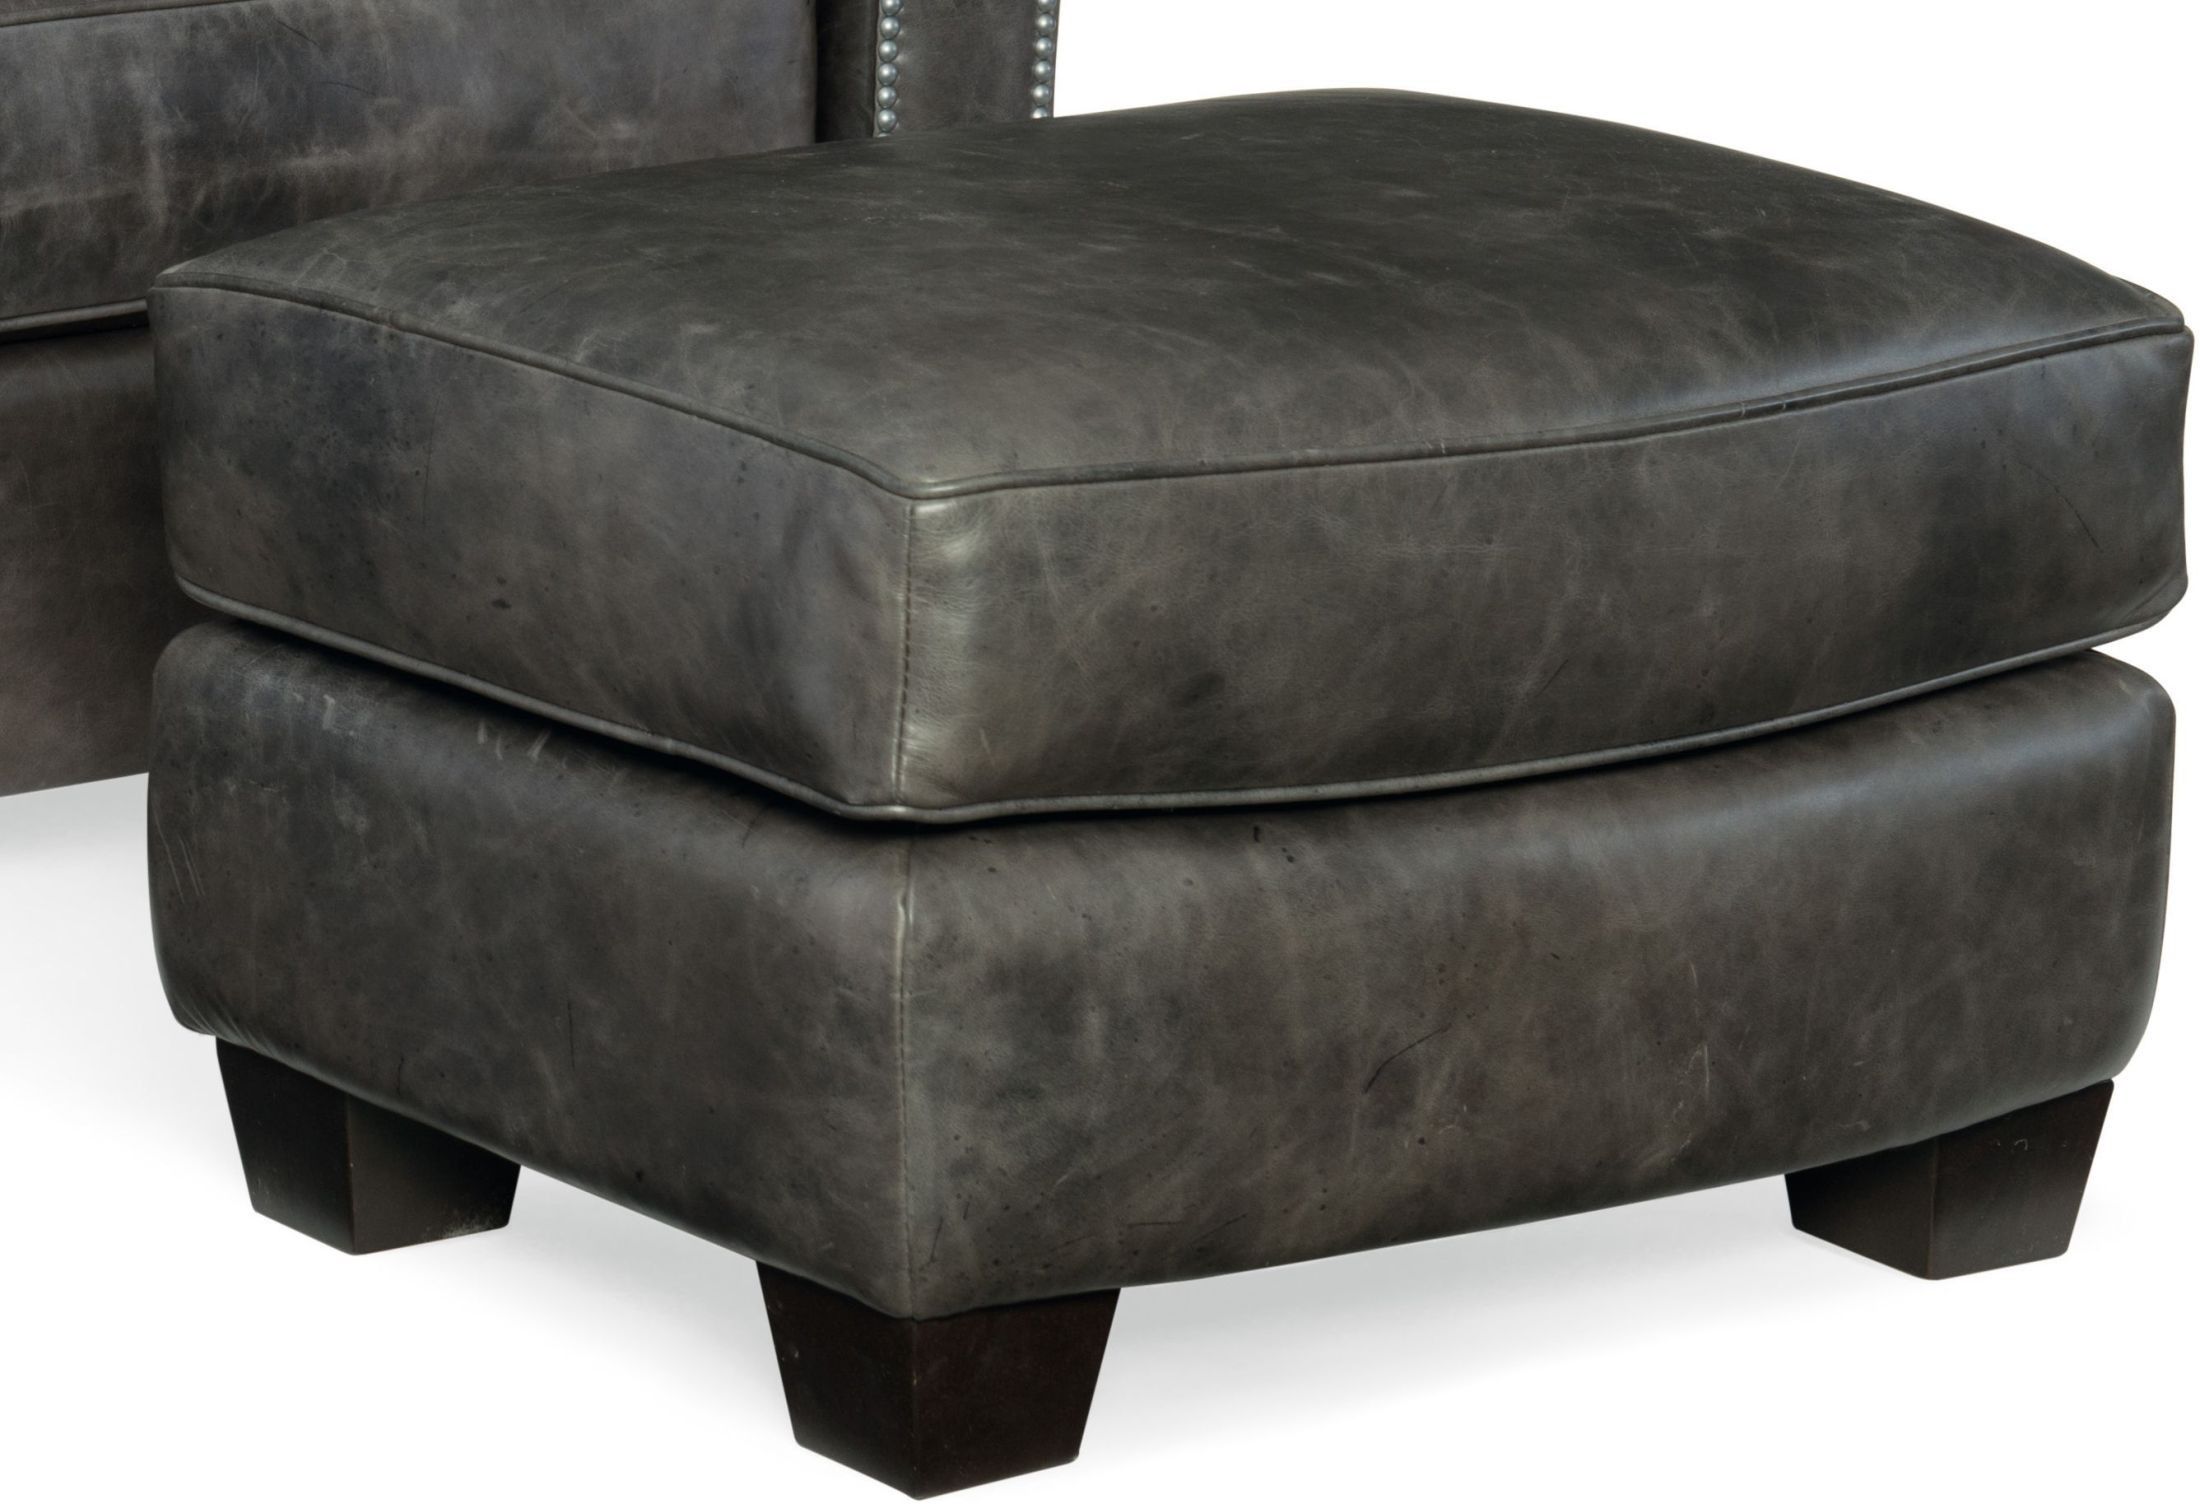 Trellis Gray Leather Ottoman From Hooker | Coleman Furniture Pertaining To Gray Moroccan Inspired Pouf Ottomans (Gallery 20 of 20)